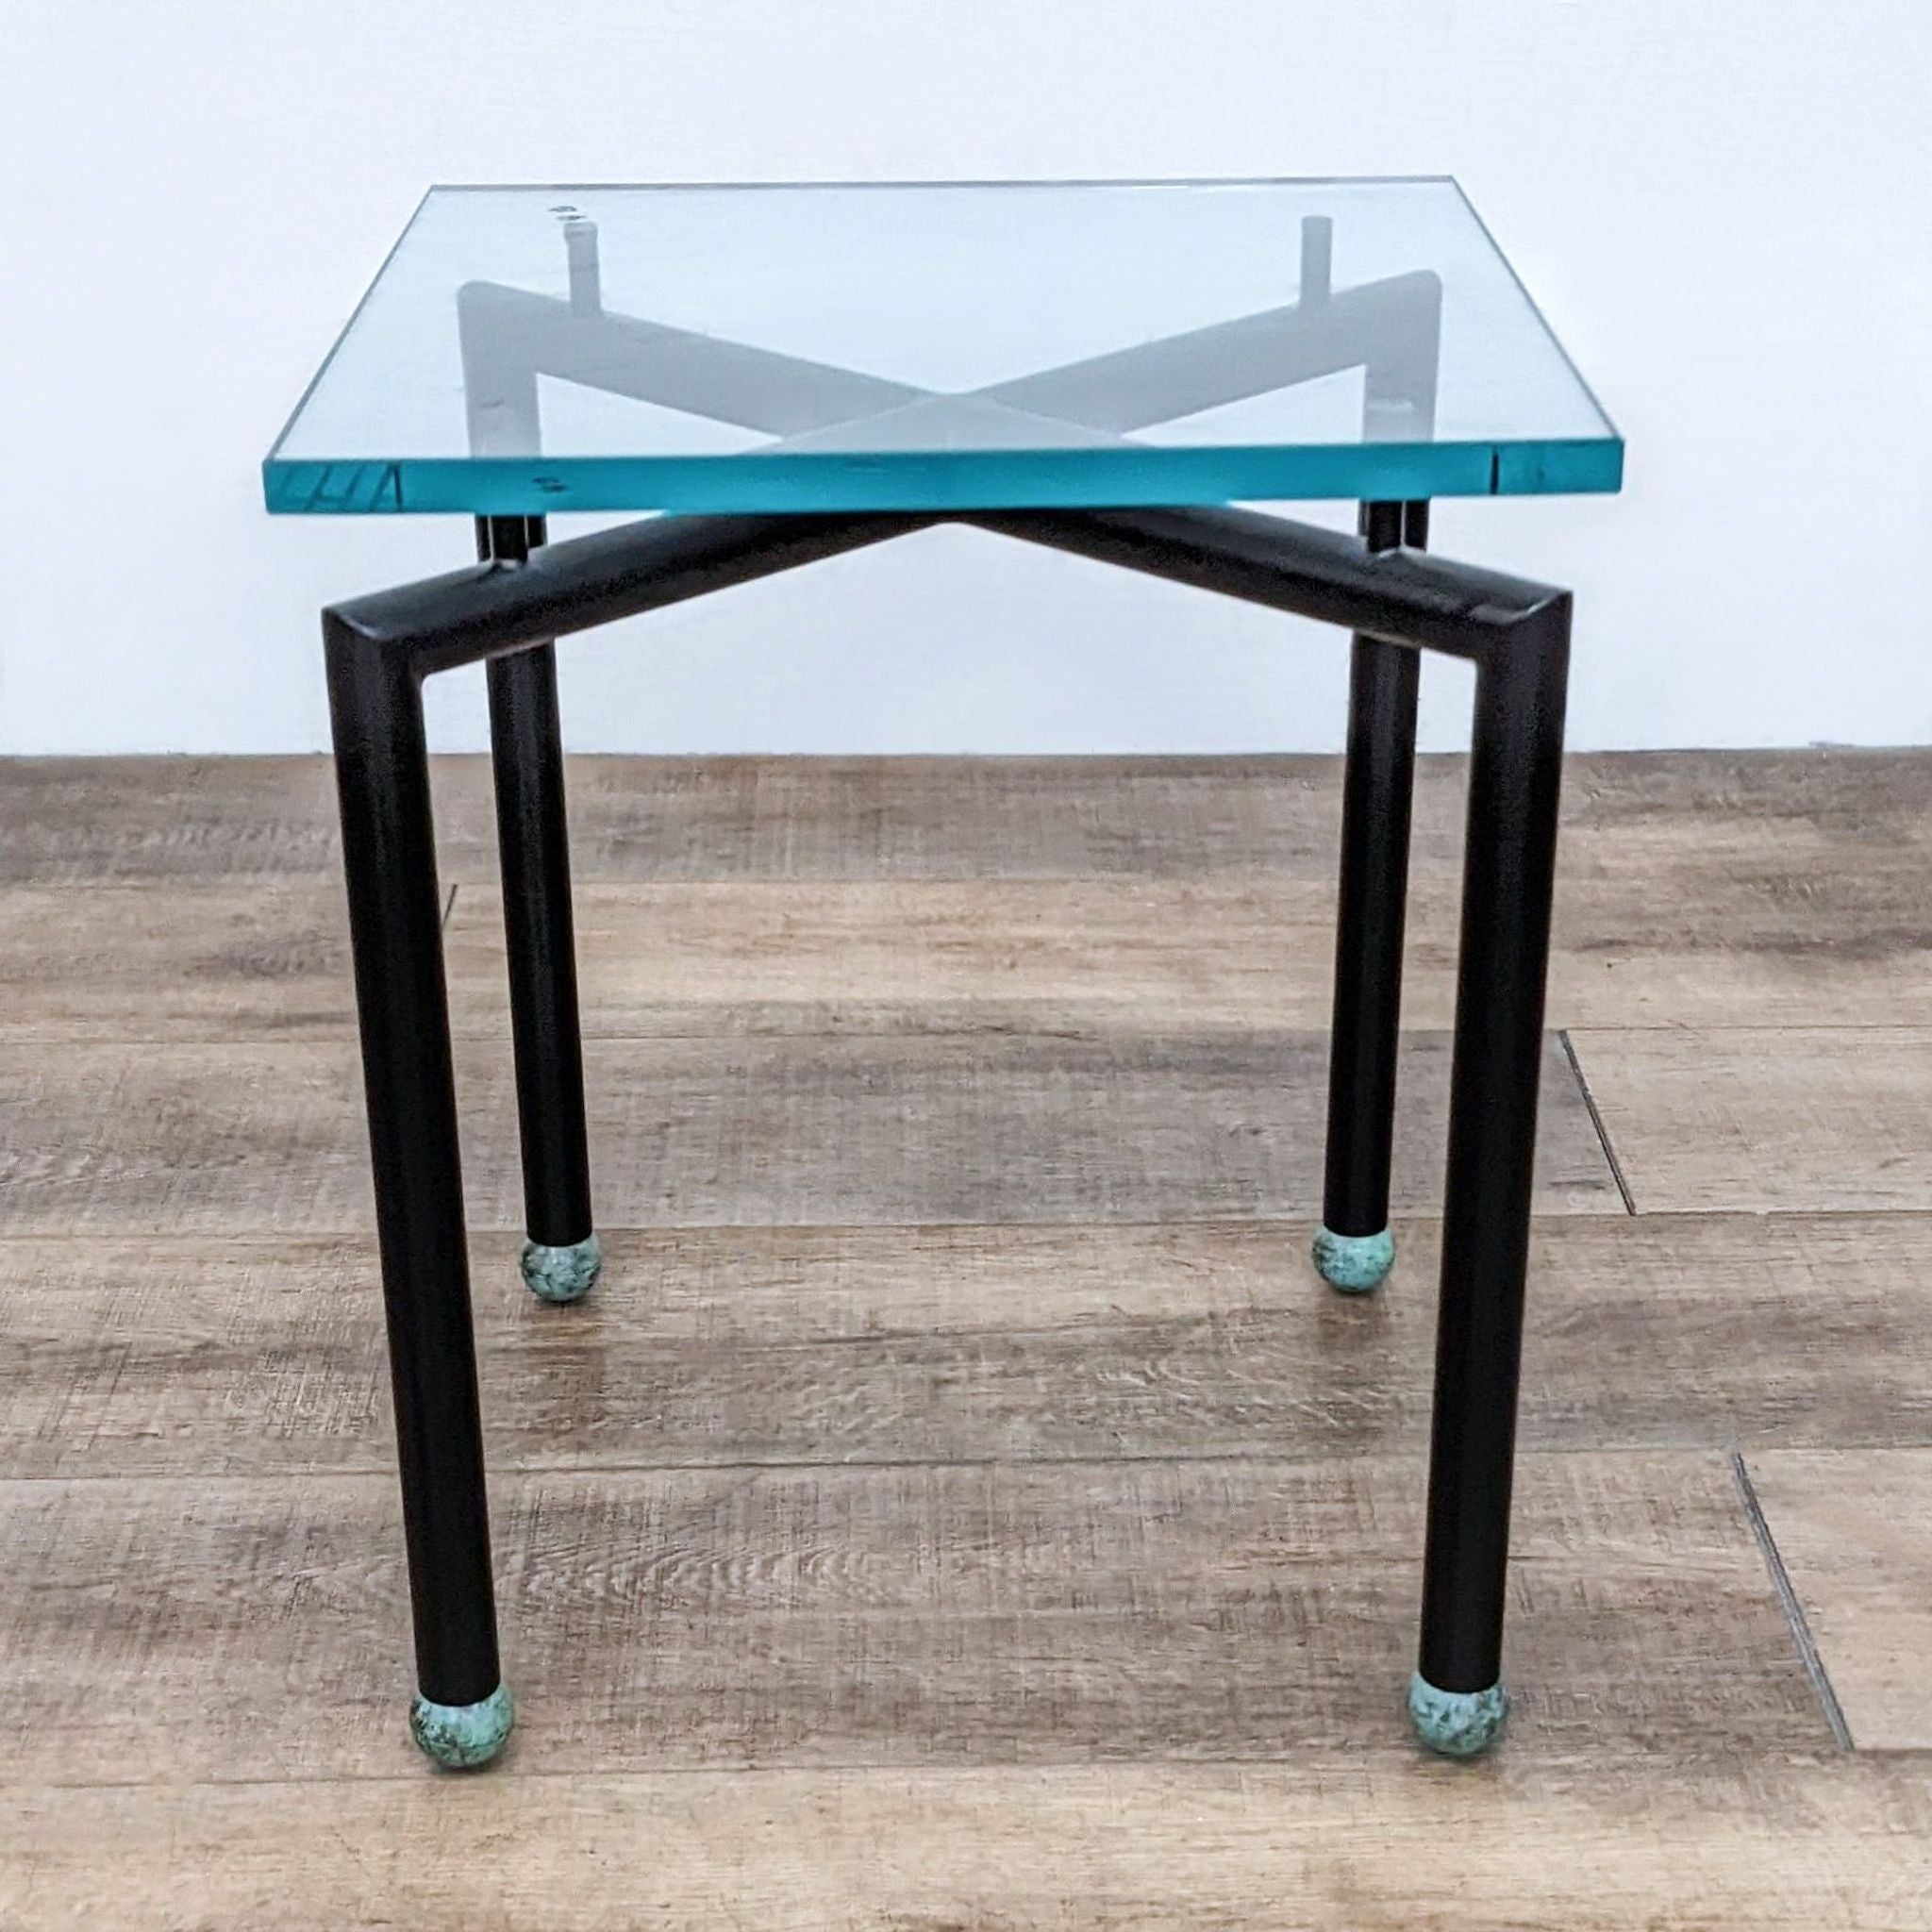 Reperch-branded side table with metal base and square glass top, featuring unique X-shaped supports.